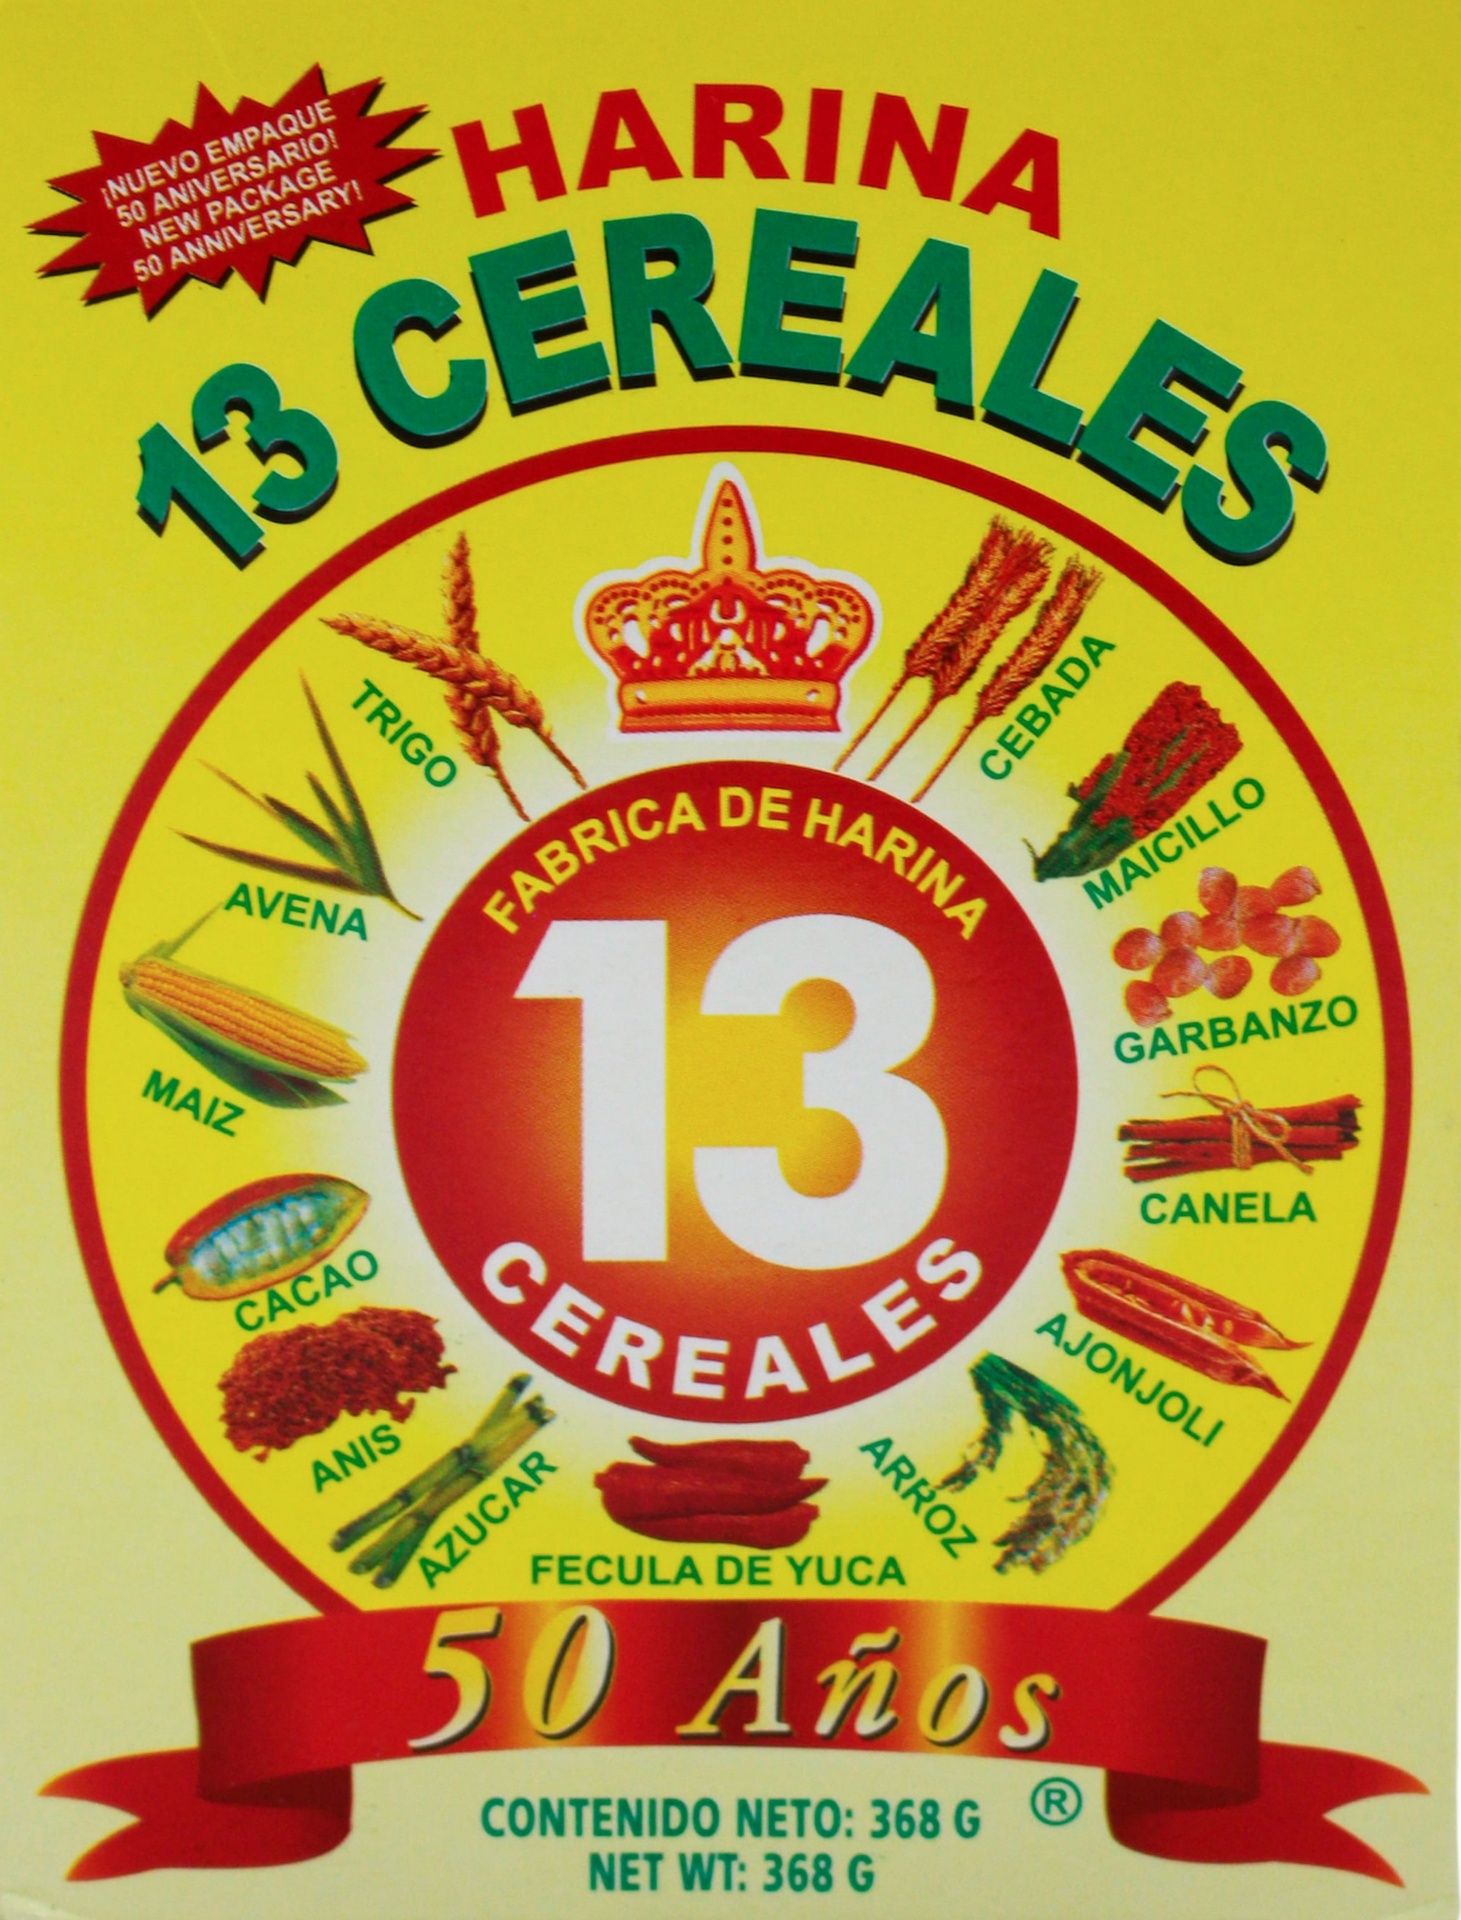  Cereales